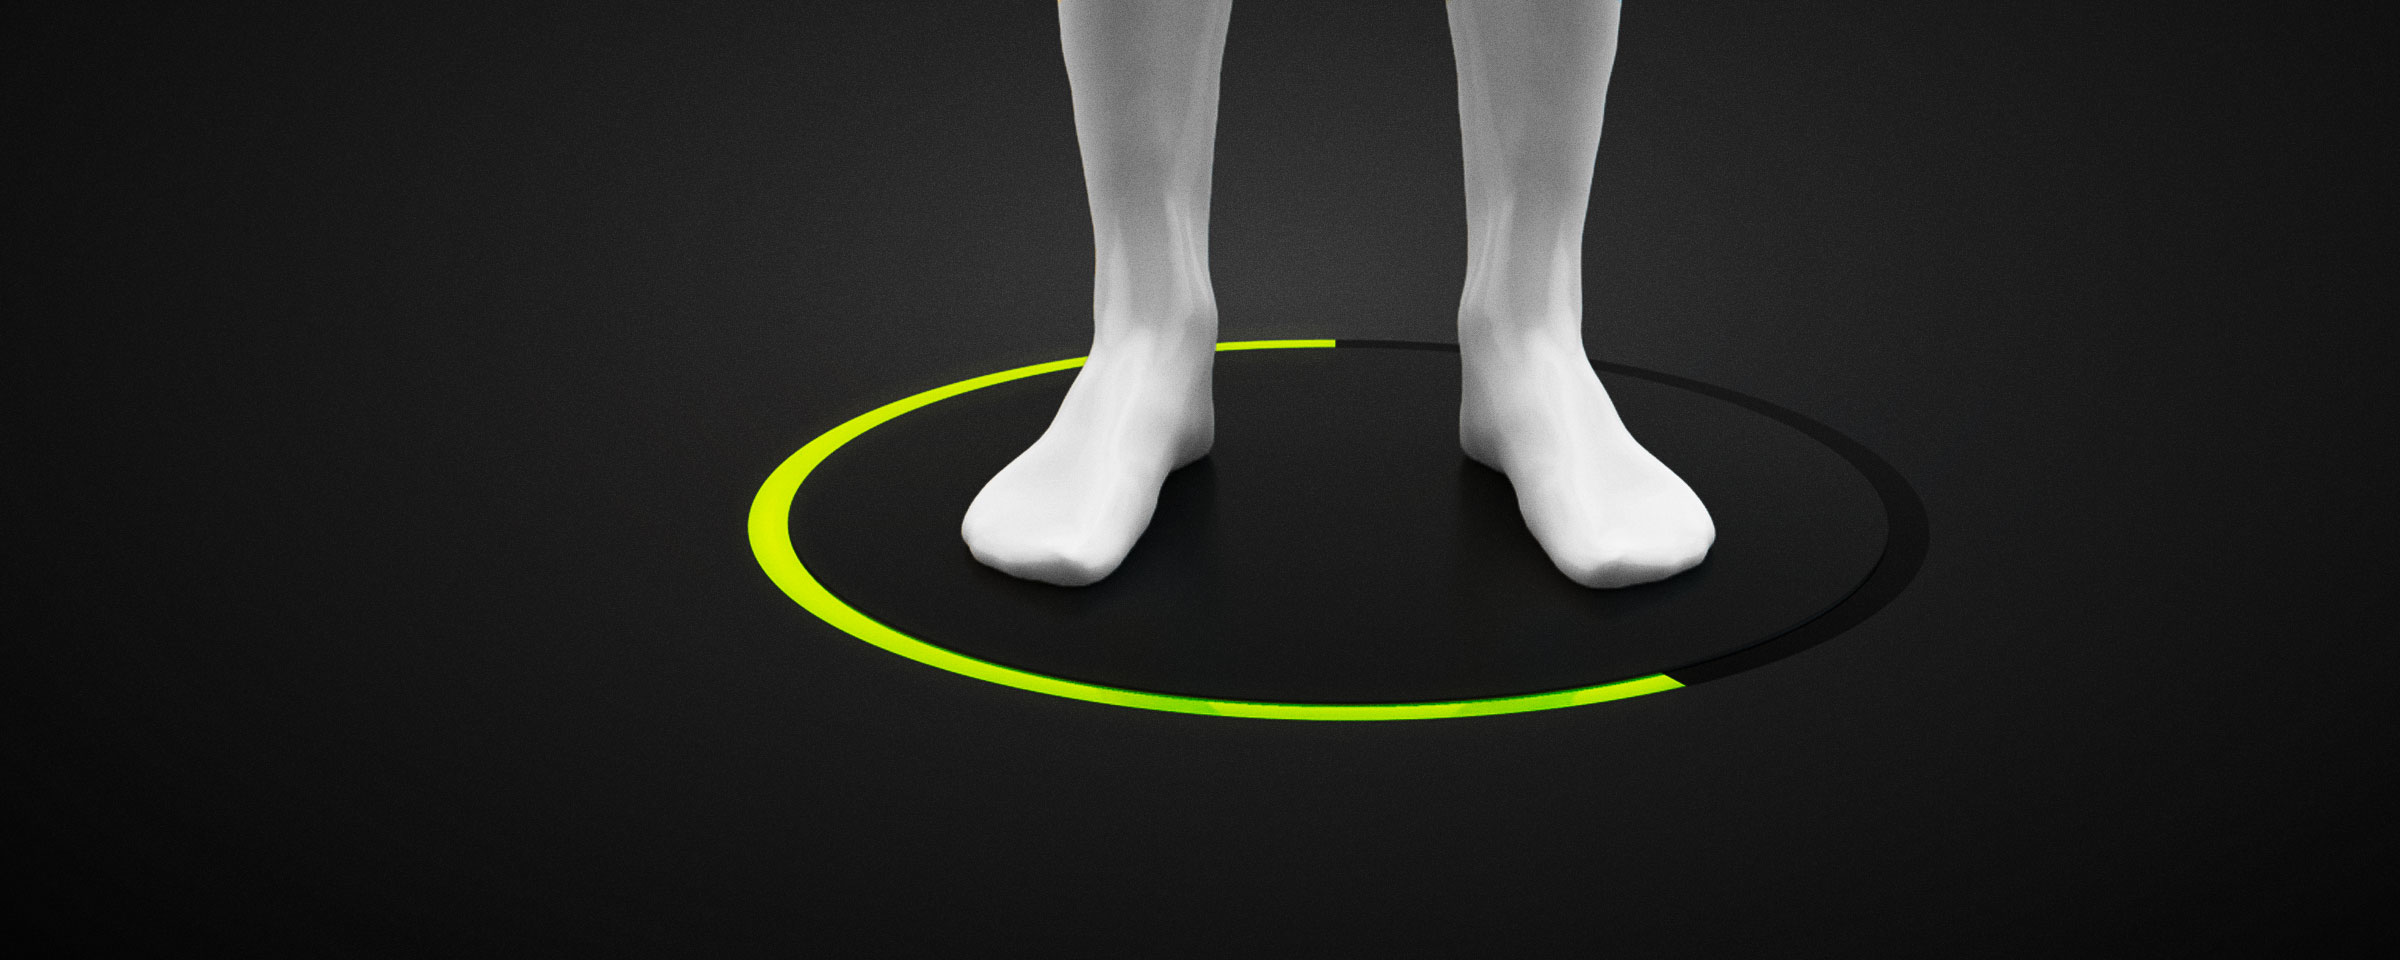 Lightbeam scans the foot shape of the feet standing on it